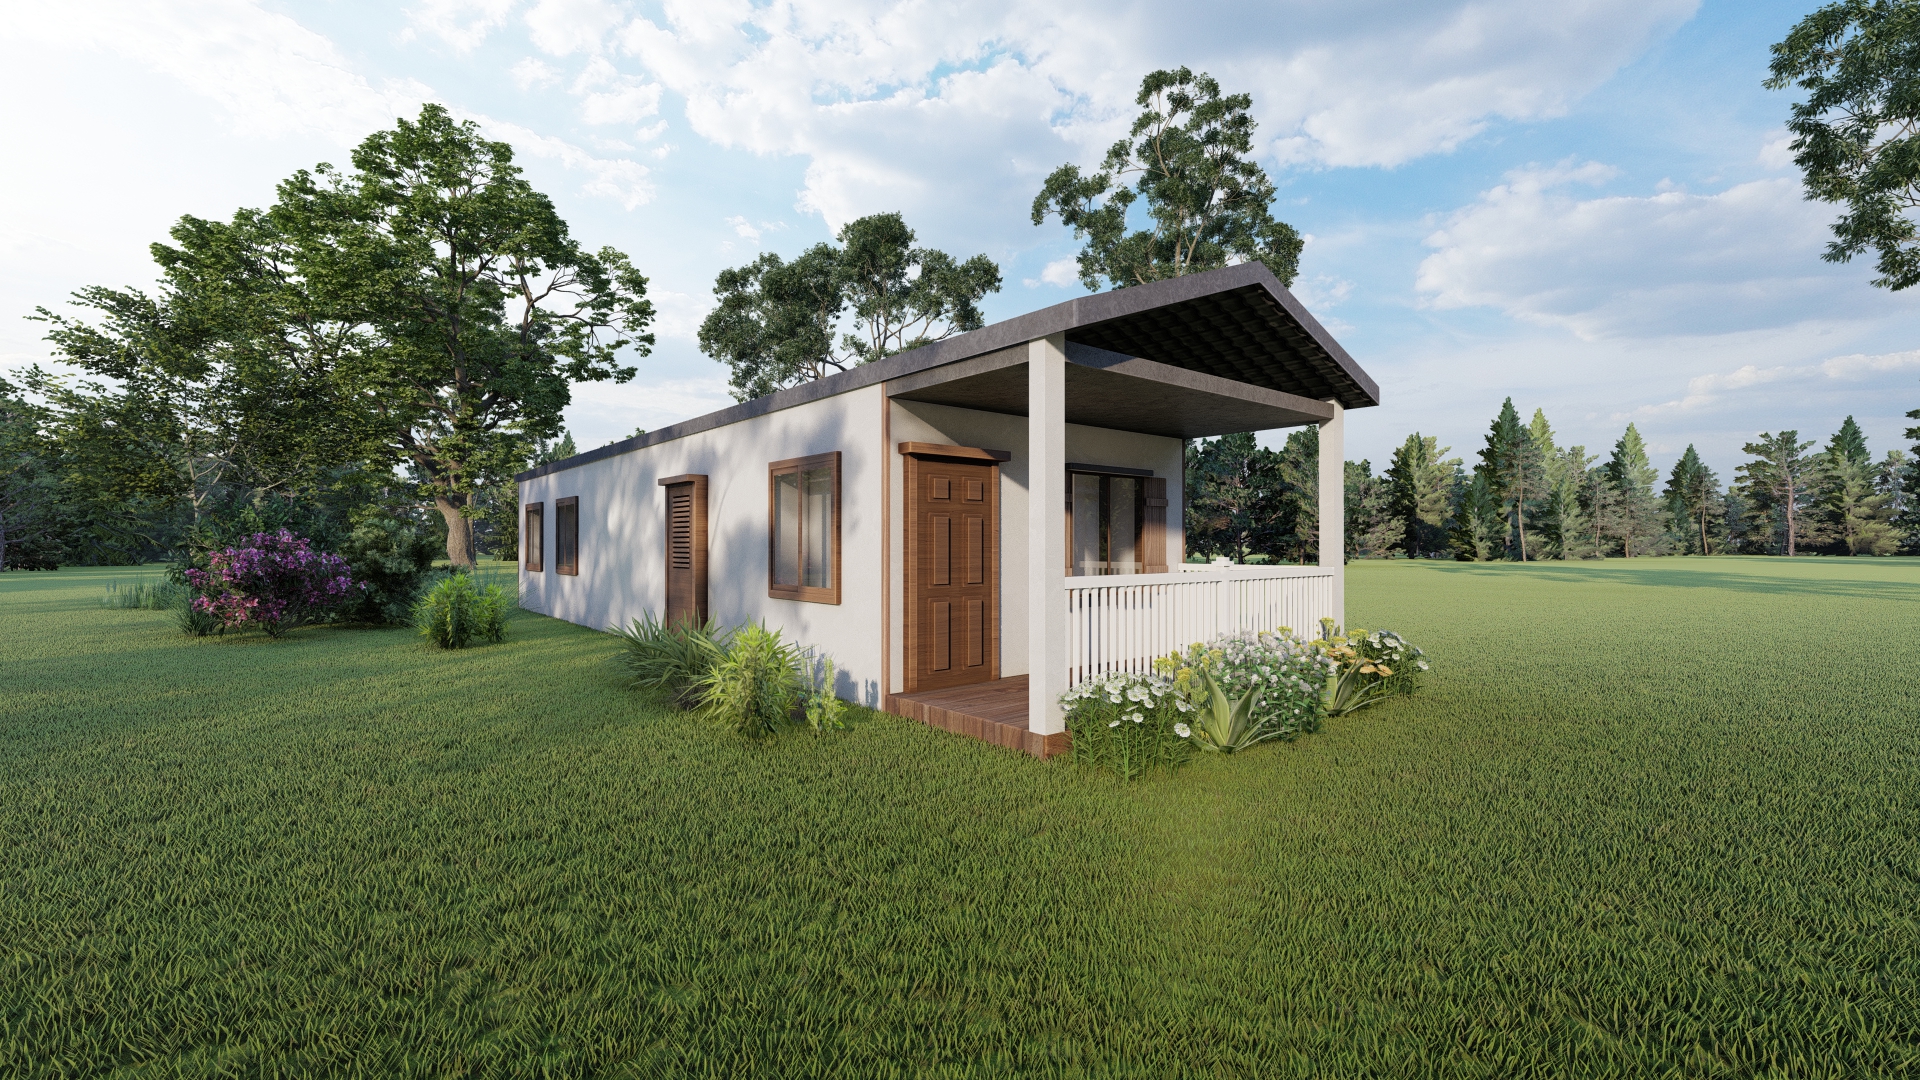 The Complete Package: Why Fabmac Tiny Homes Shine Above DIY Kits